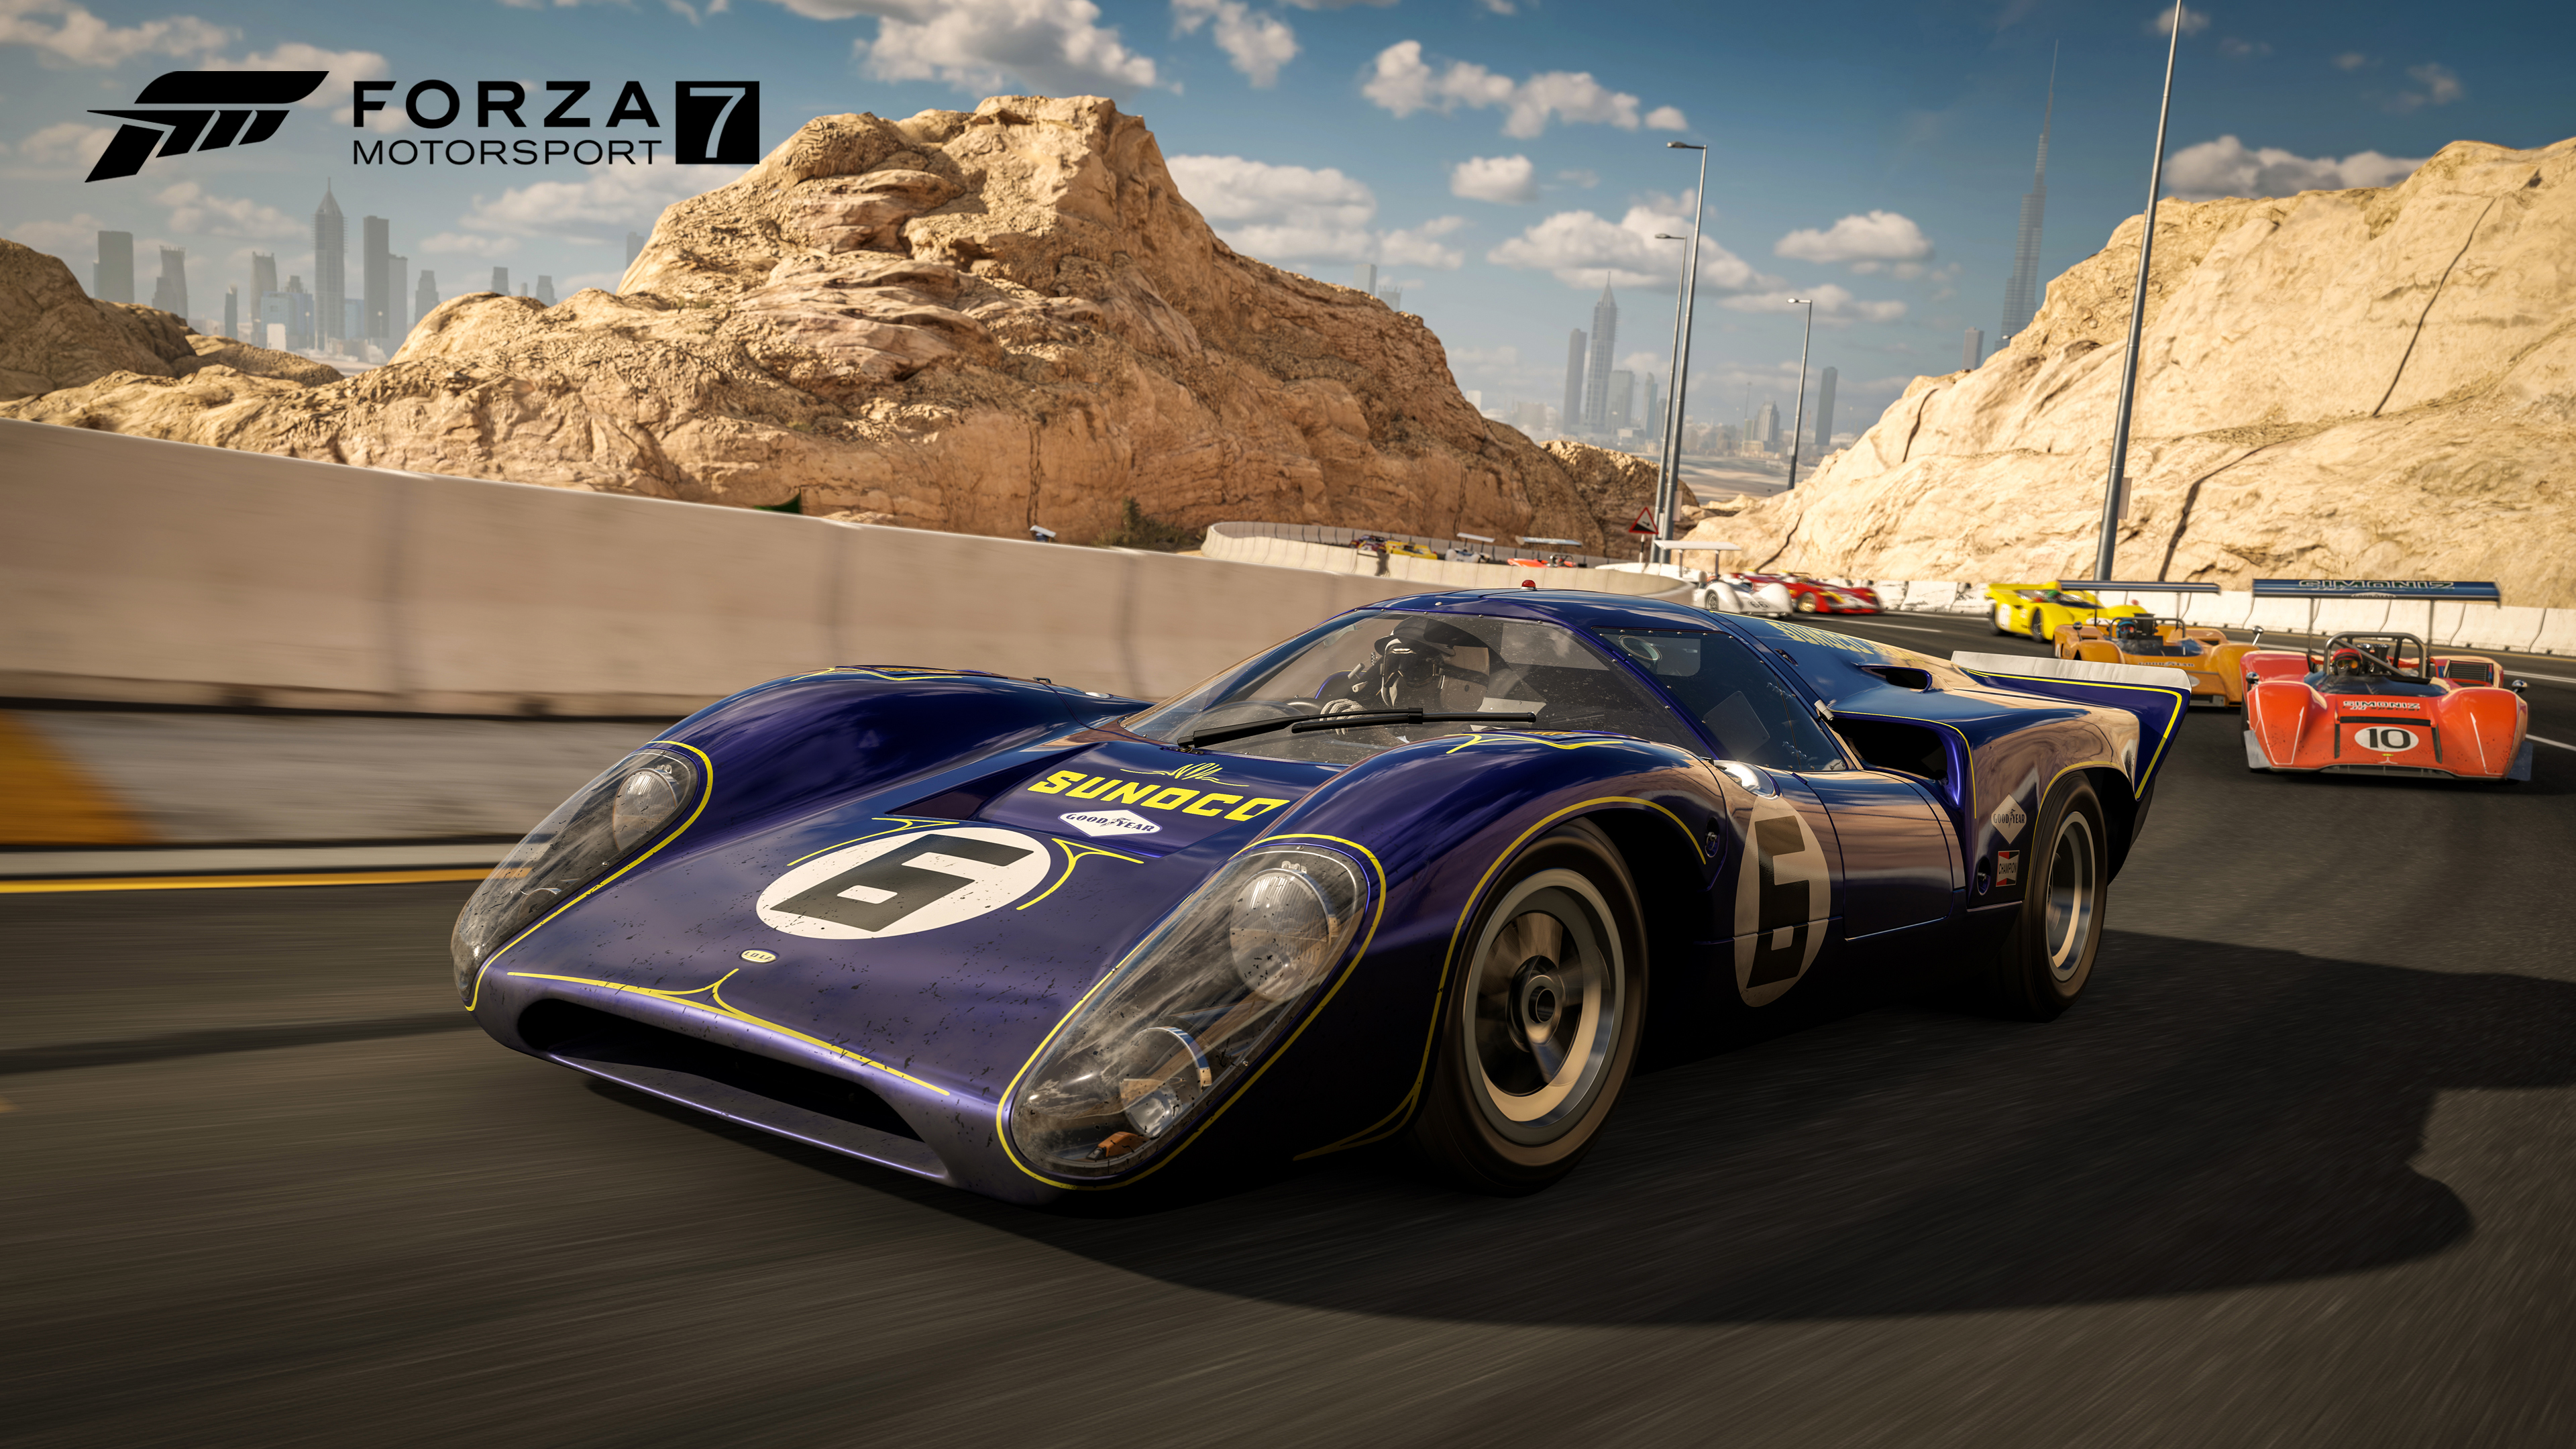 Media asset in full size related to 3dfxzone.it news item entitled as follows: Terminato lo sviluppo del racing game Forza Motorsport 7  in arrivo la demo | Image Name: news26995_Forza-Motorsport-7-Screenshot_5.jpg